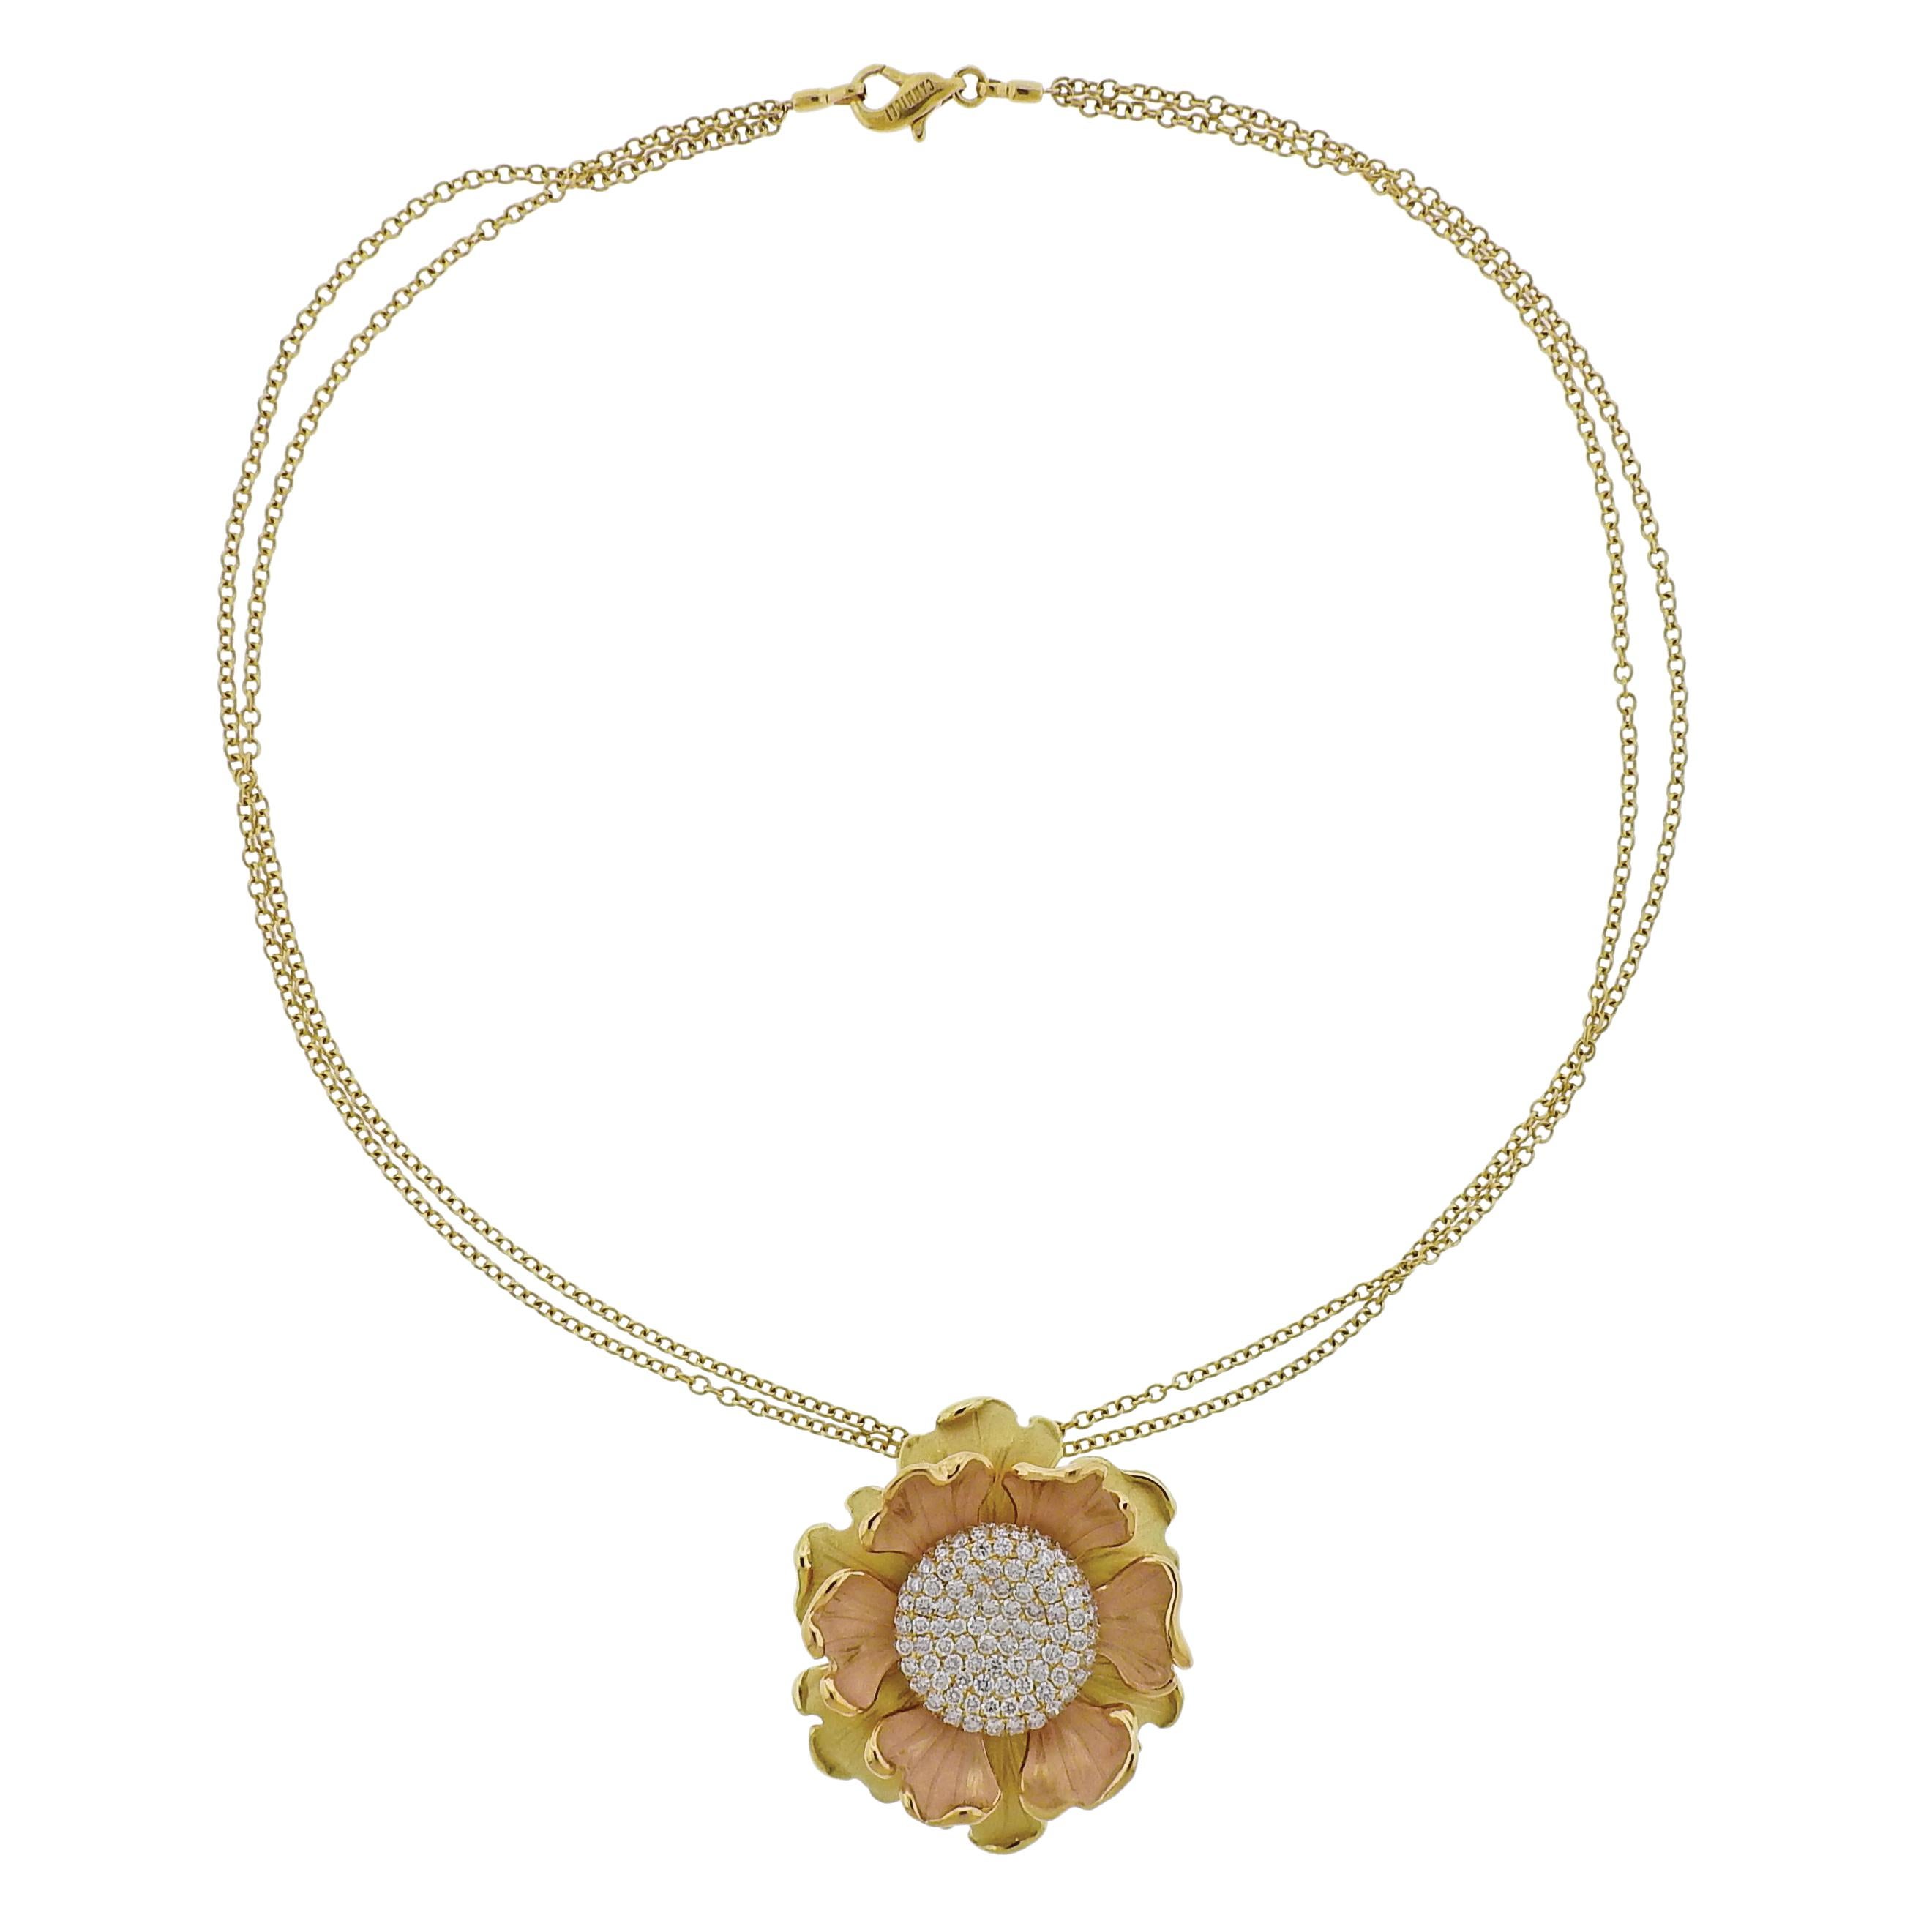 Brand new 18k yellow and rose gold Lirika flower necklace, by Italian designer Annamria Cammilli, set with 3.08ctw in GH/VS diamonds. Comes with box and COA, retail $19030. Necklace is 16